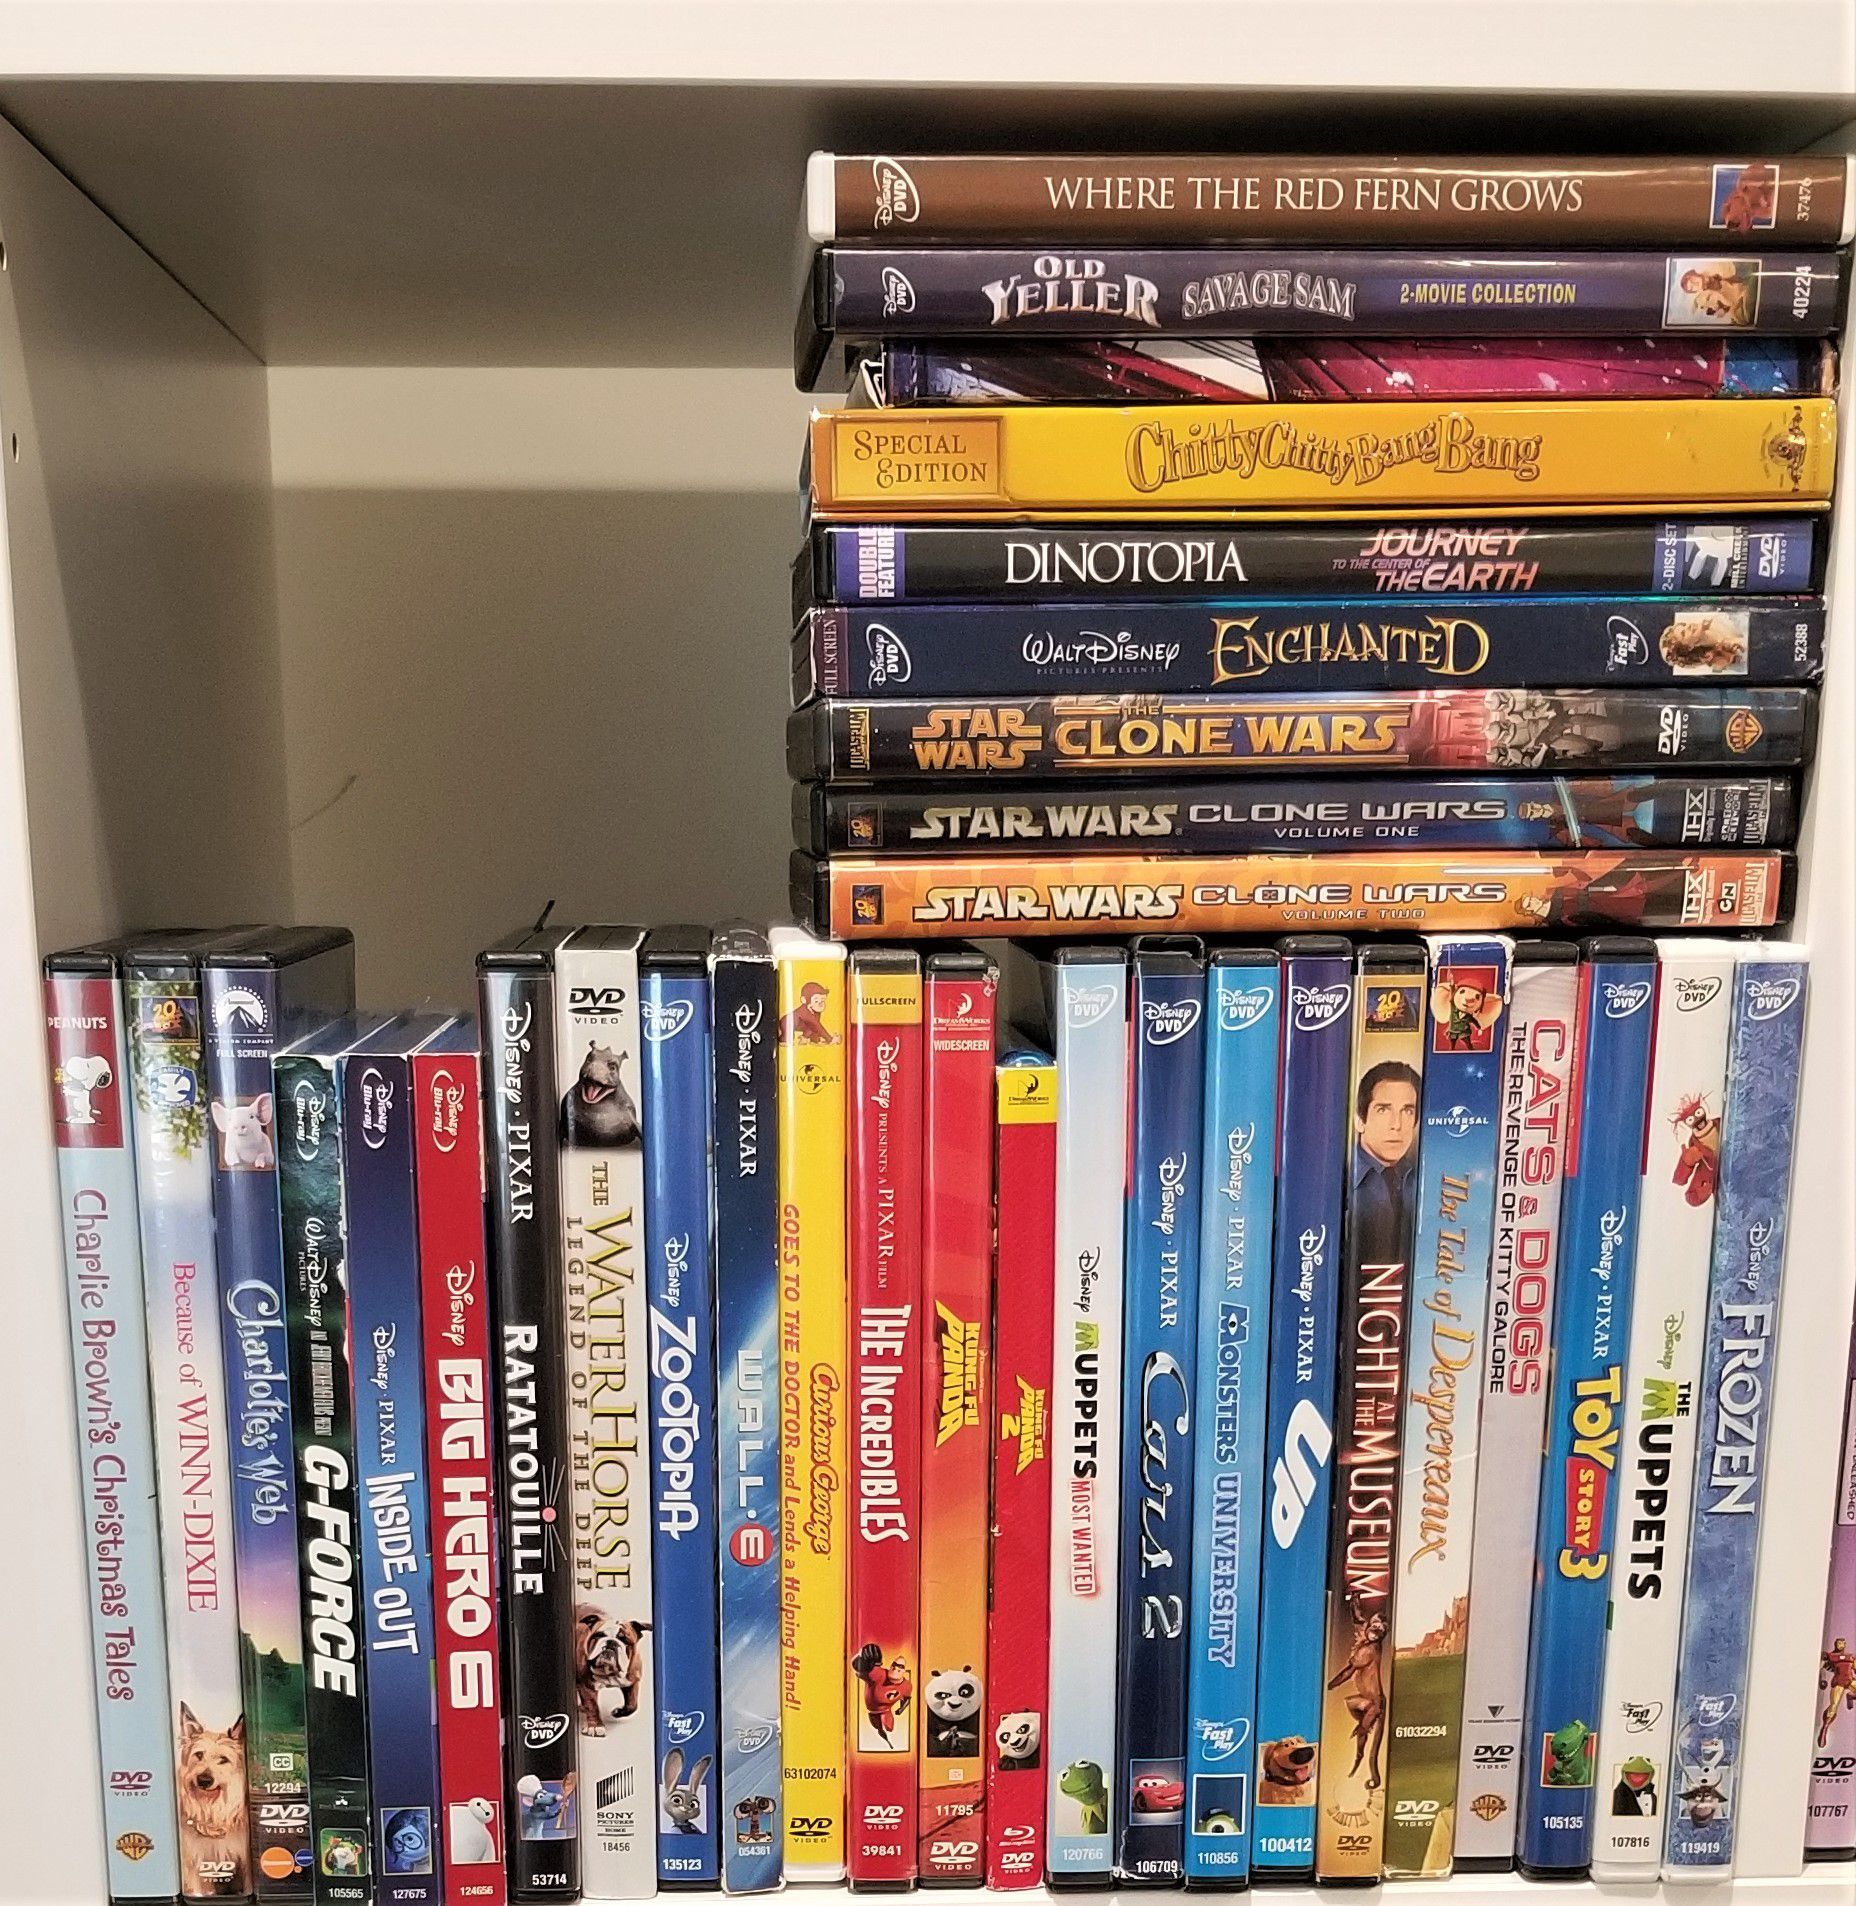 86 DVDs - Family Friendly